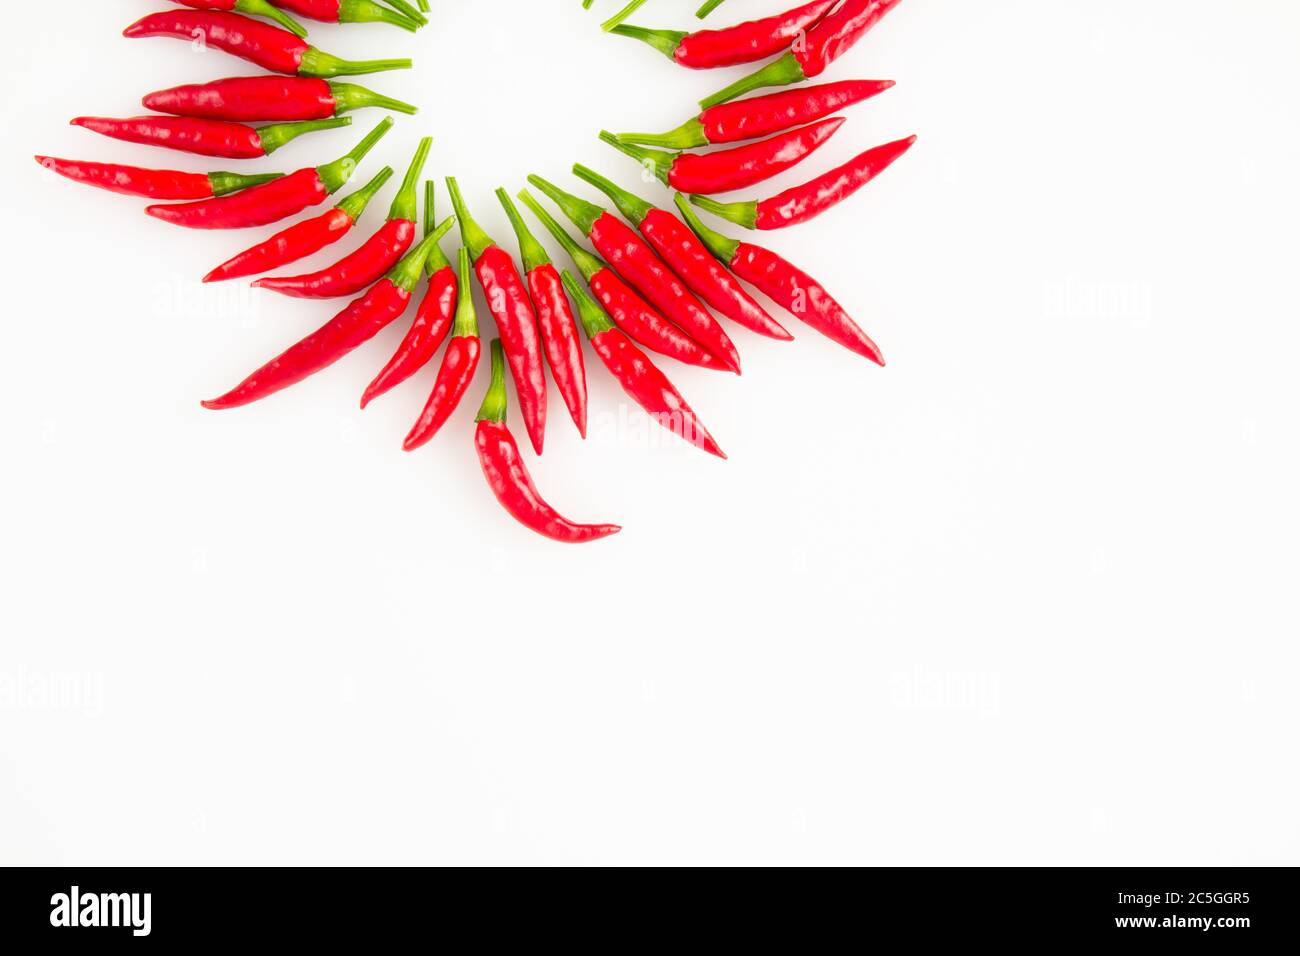 Background of red ripe Thai peppers arranged in a circle with white background and copy space. Stock Photo